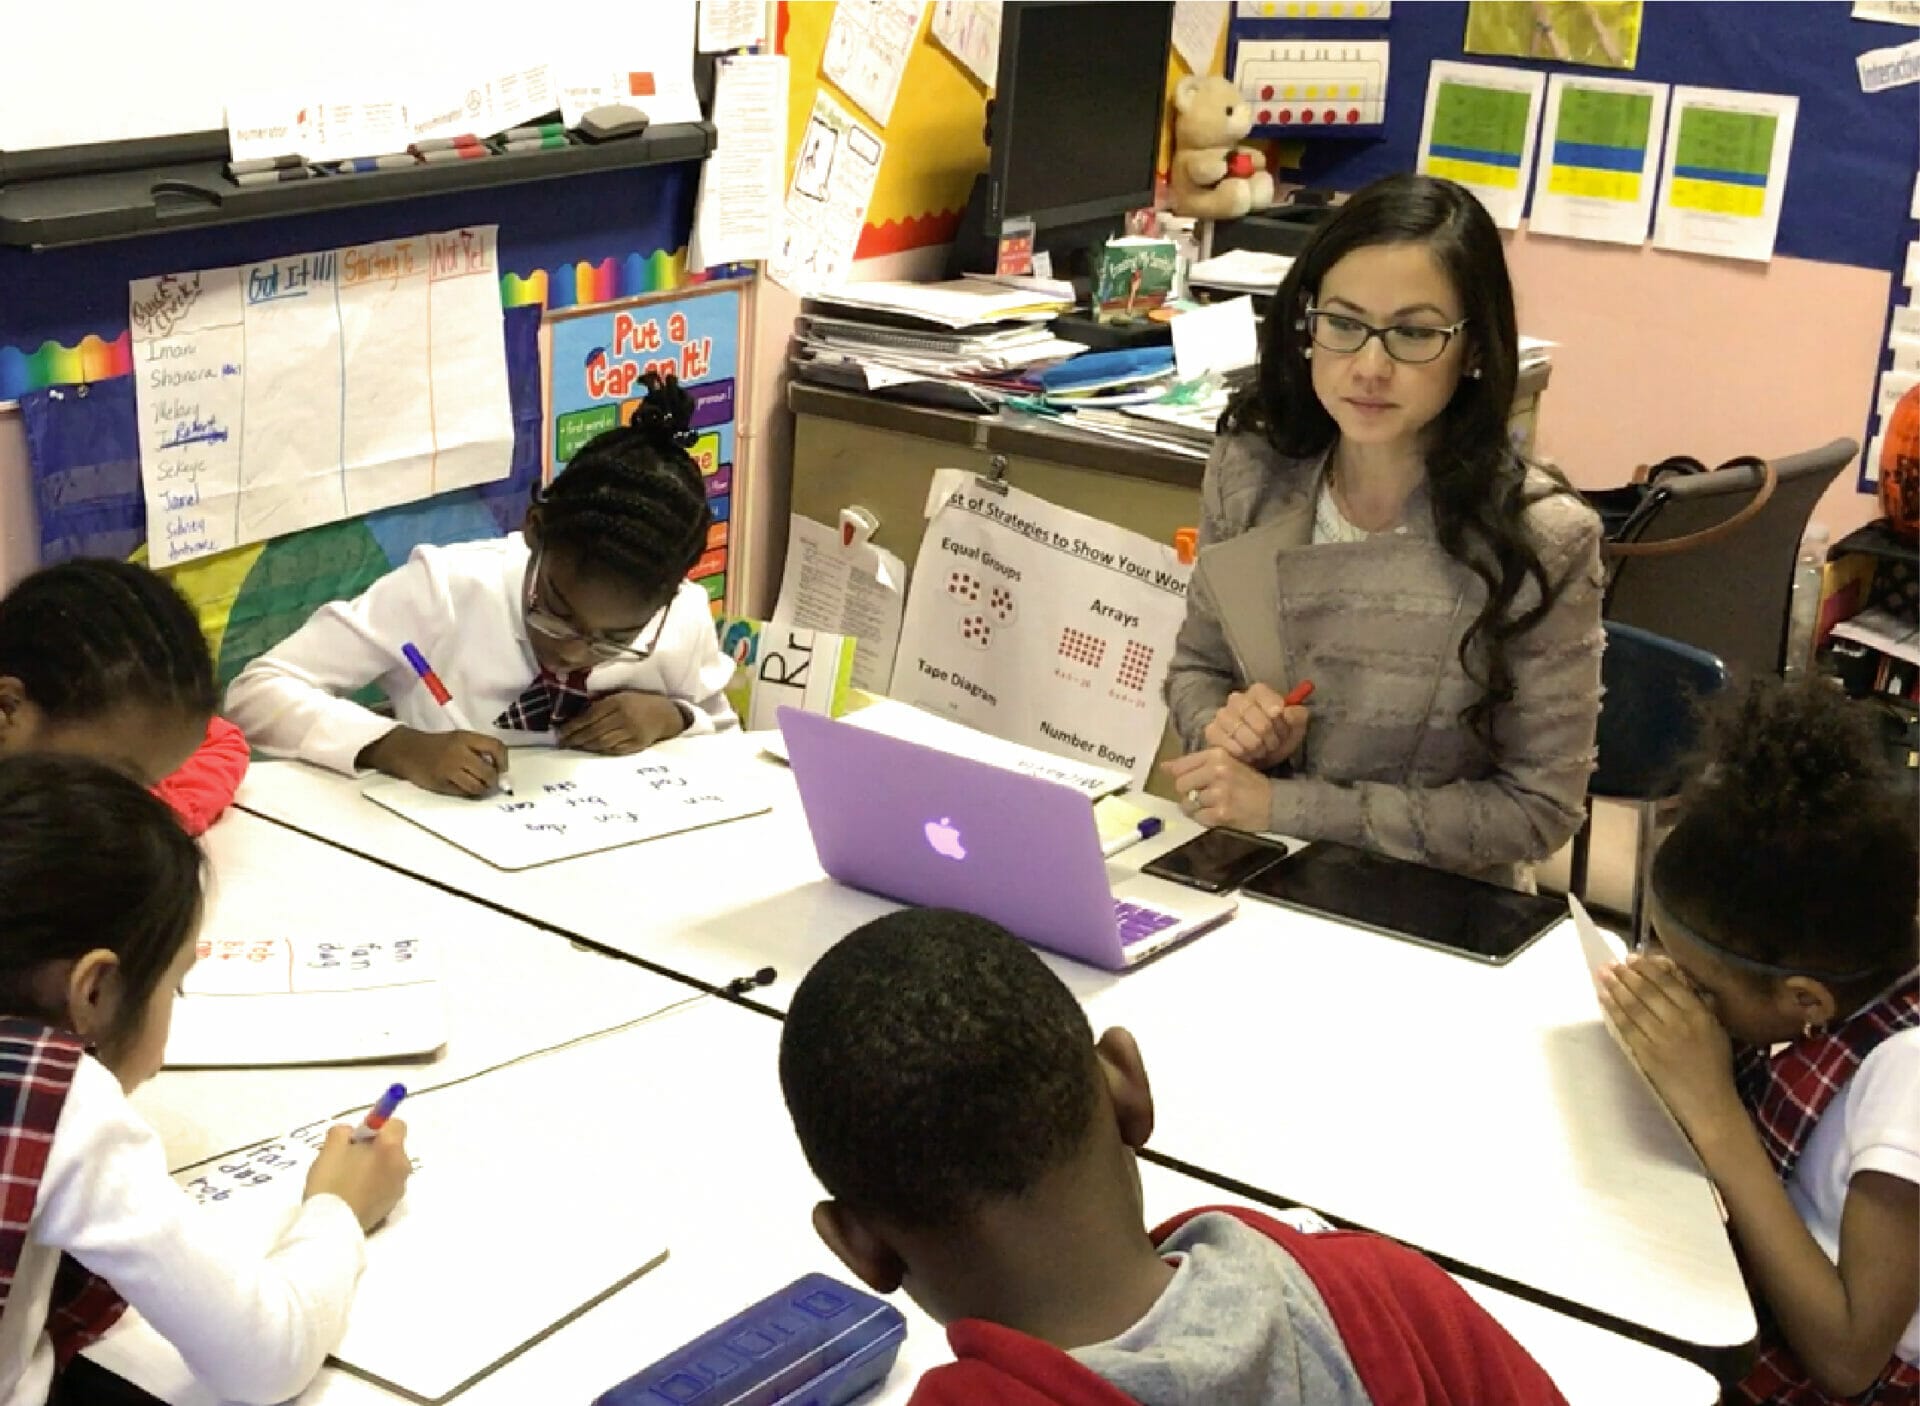 A teacher working with five students around a table